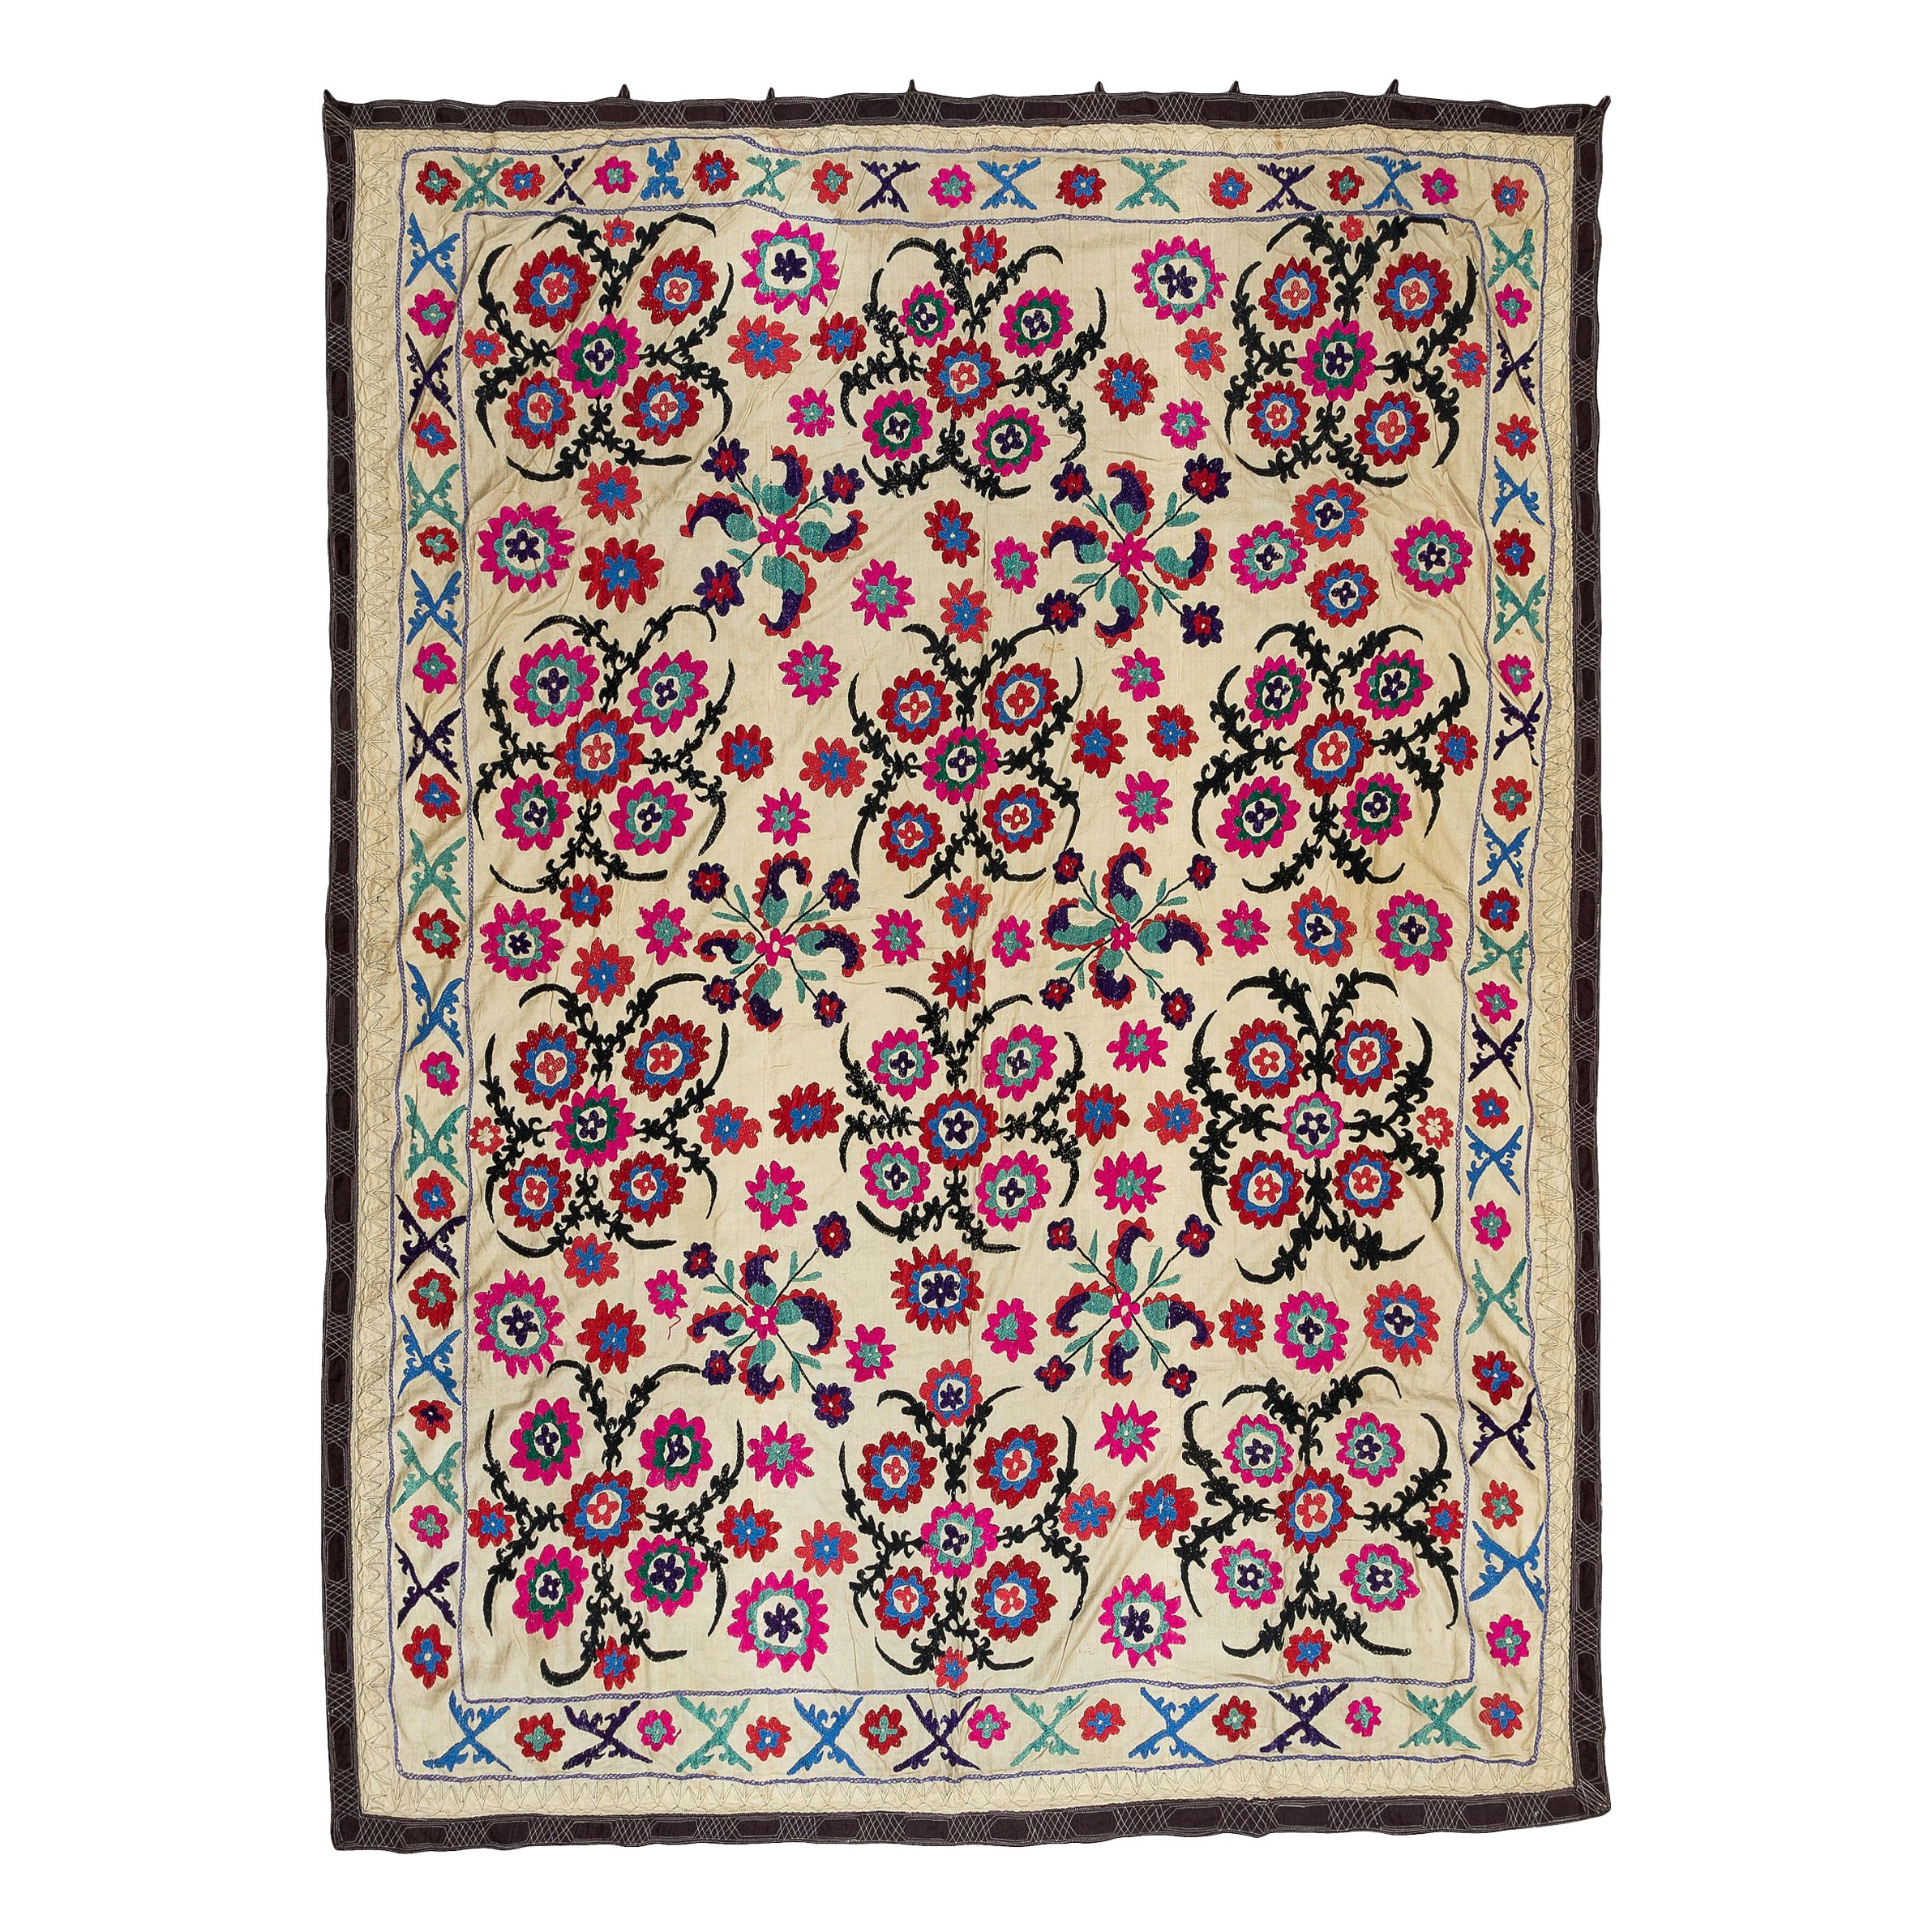 5.6x7.4 Ft Decorative Silk Embroidery Bed Cover, Uzbek Vintage Suzani Tablecloth For Sale